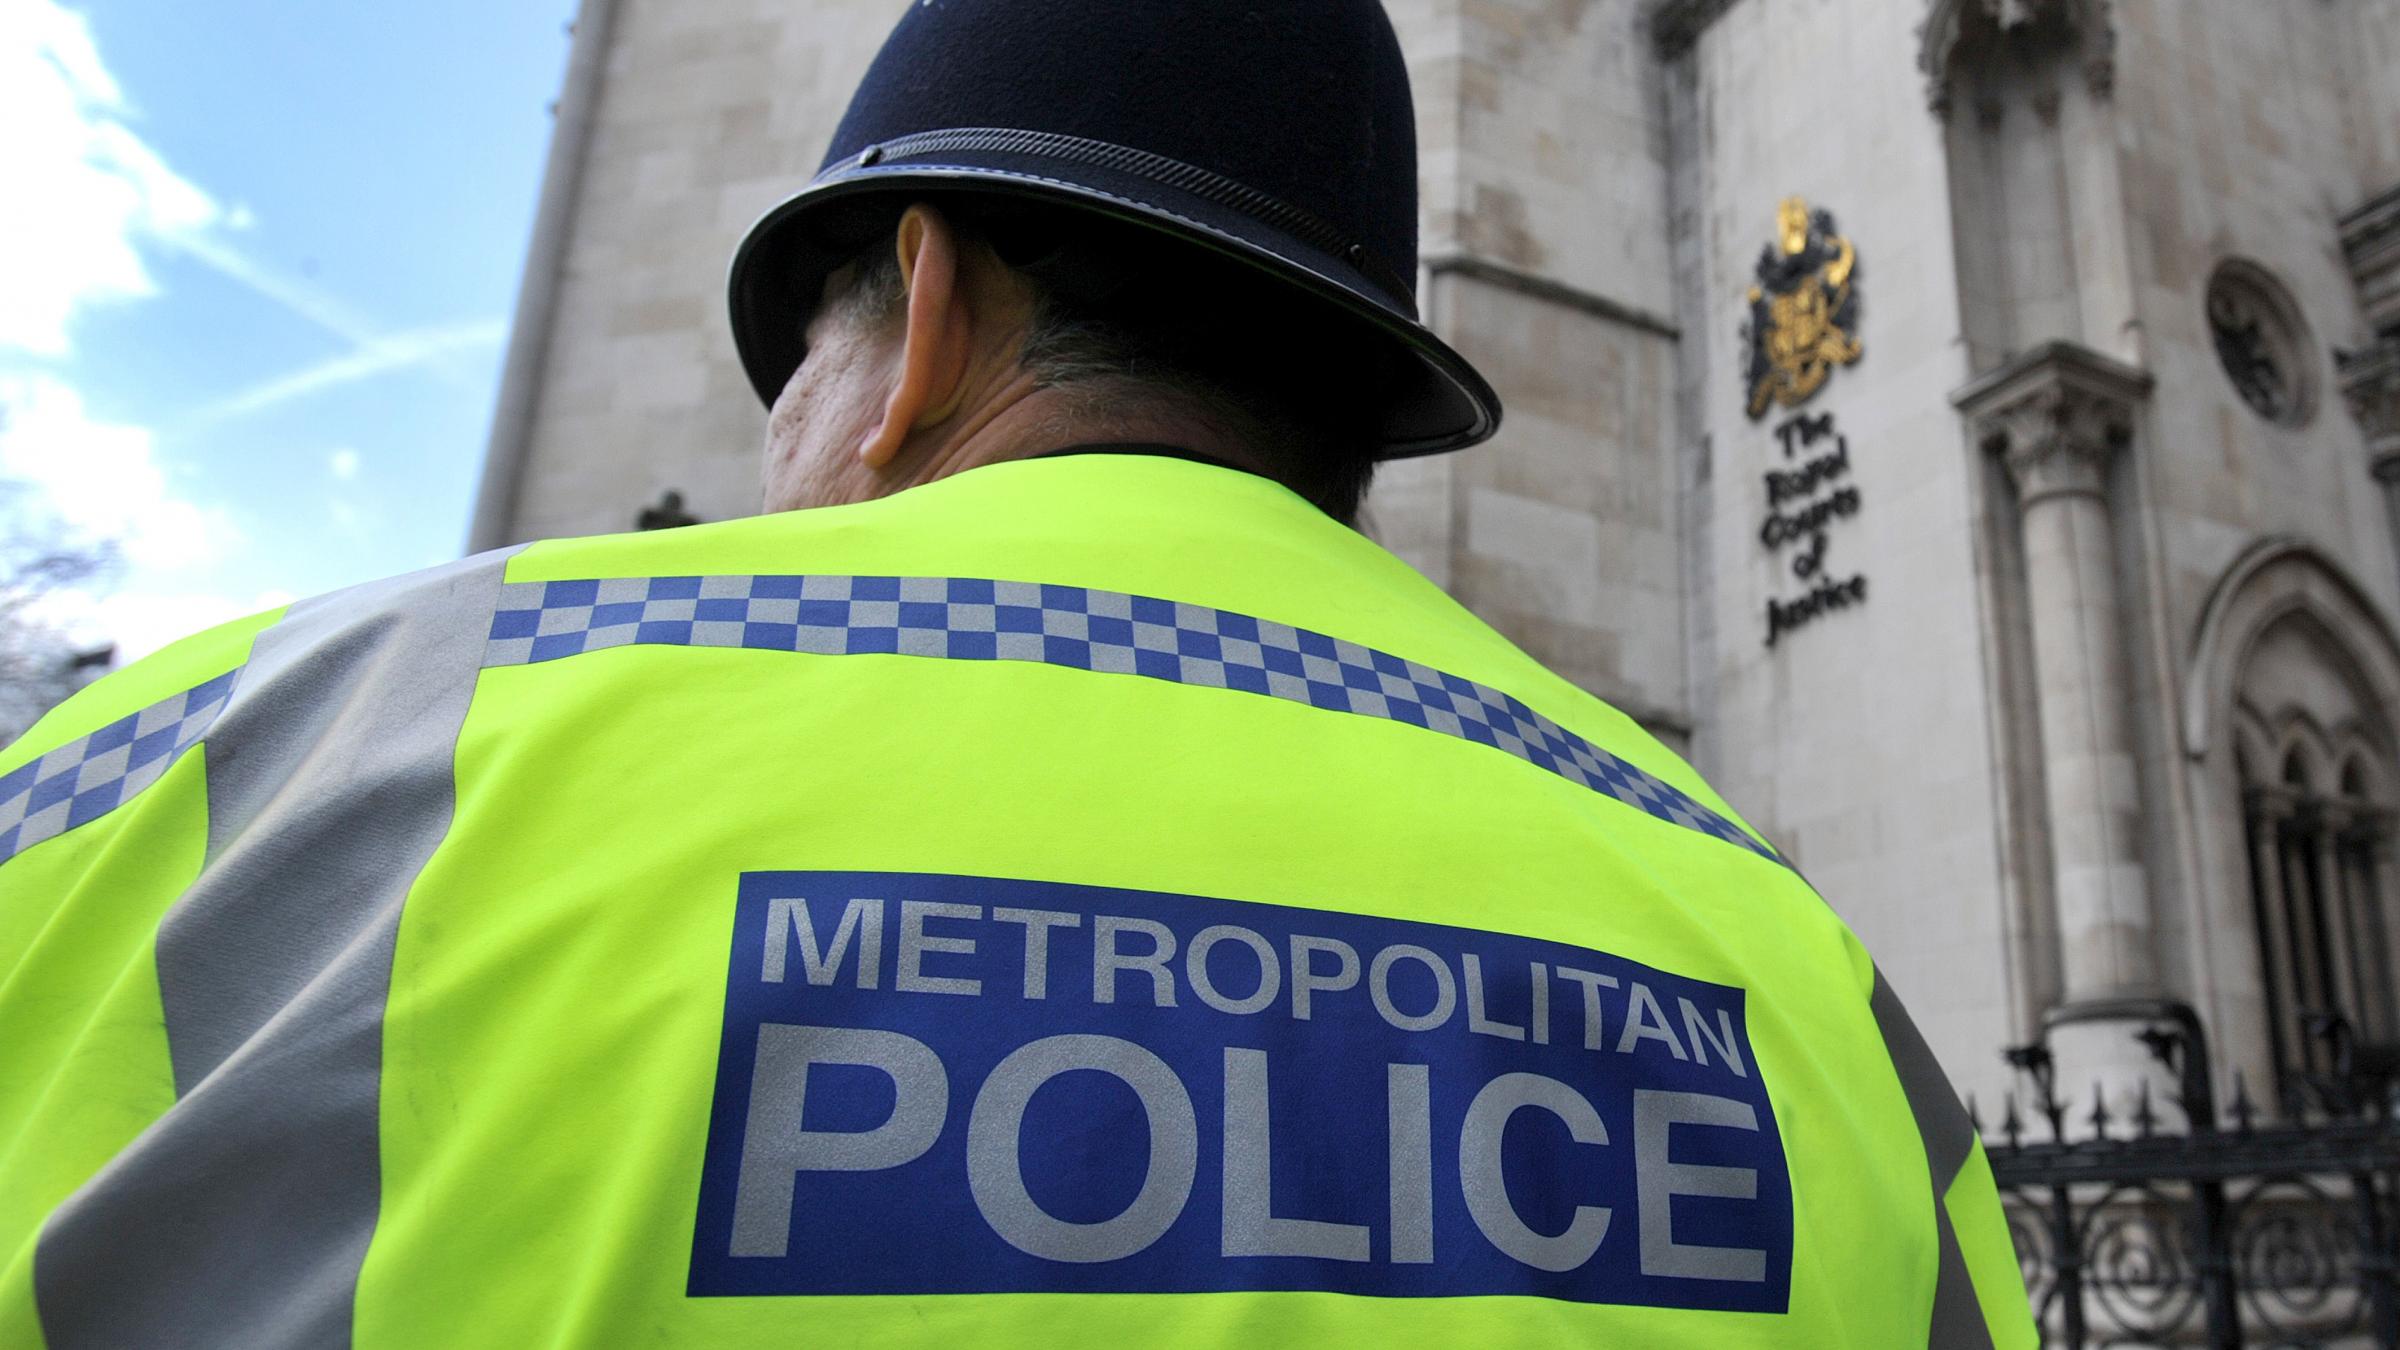 Man arrested and bailed after swoop by counter-terror officers - Hillingdon Times